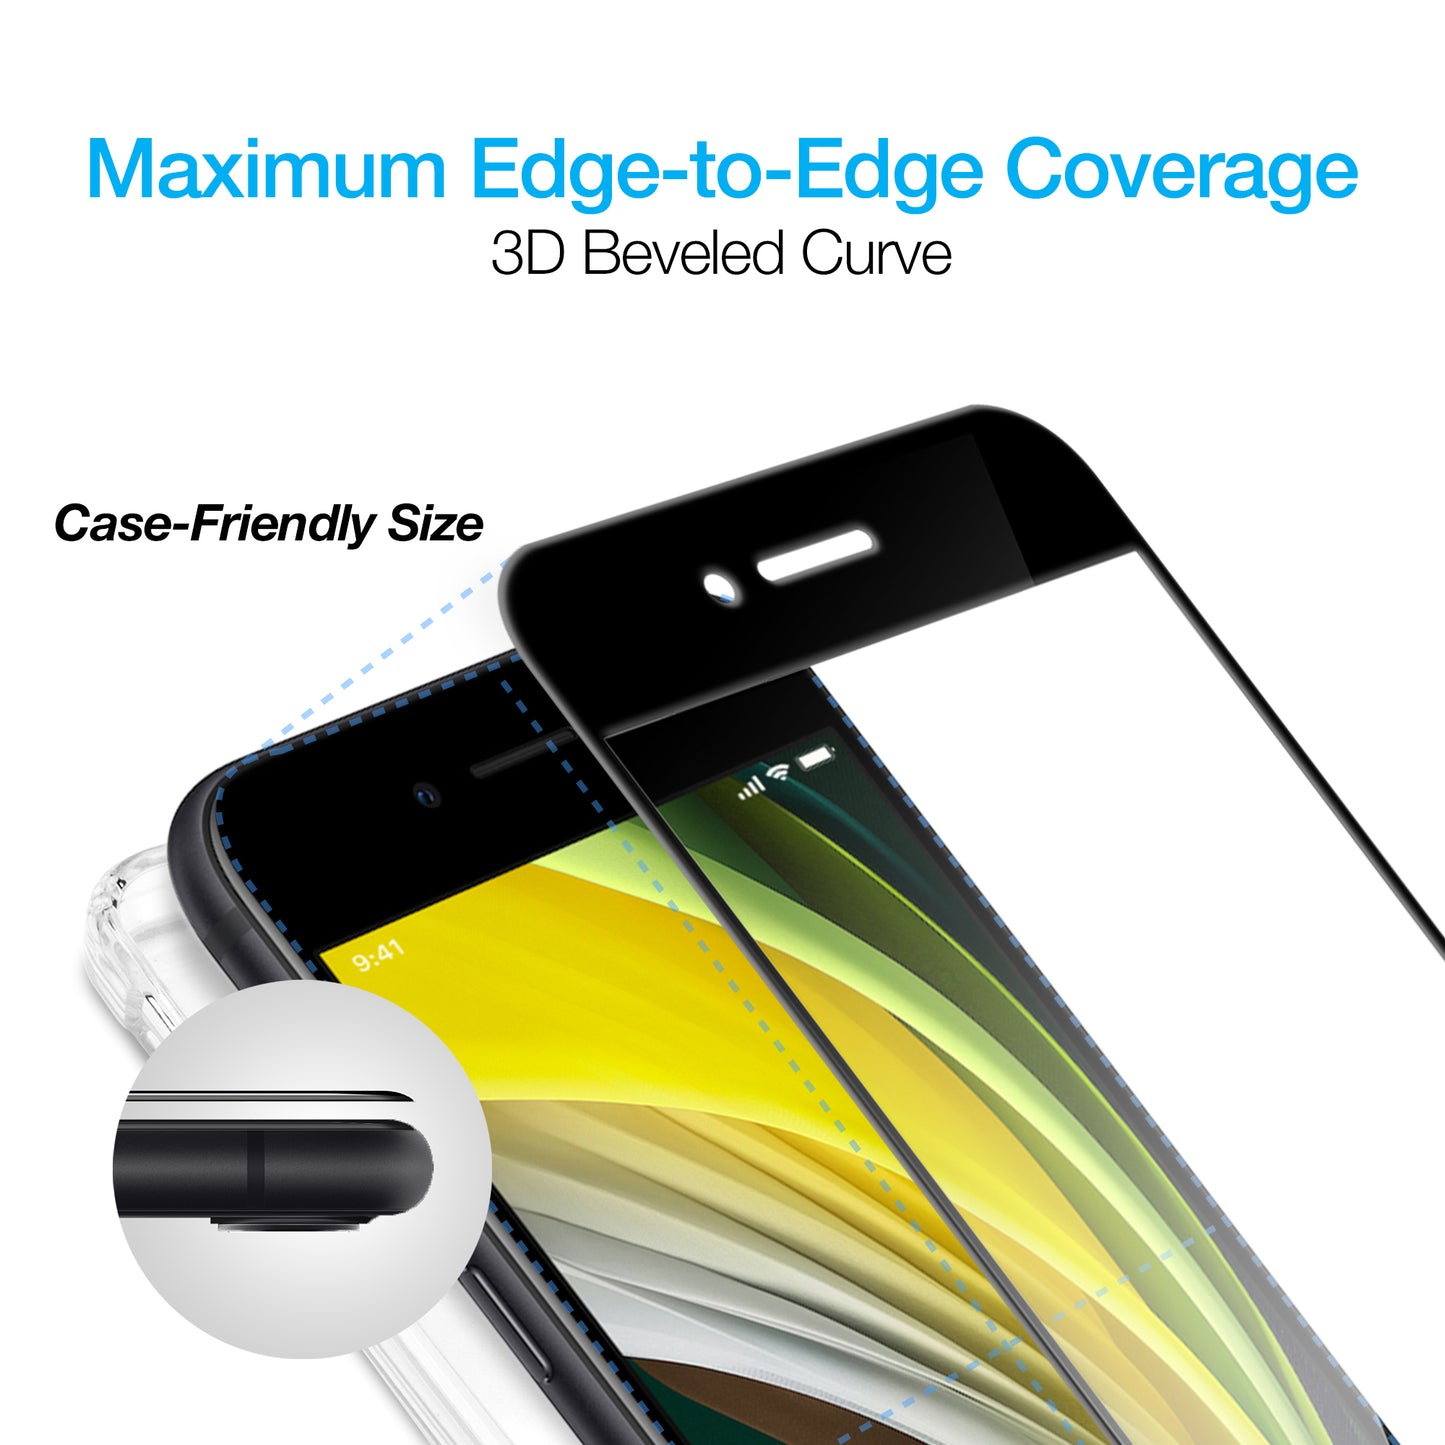 IntelliShield HD Tempered Glass with 3D Edge for new iPhone SE